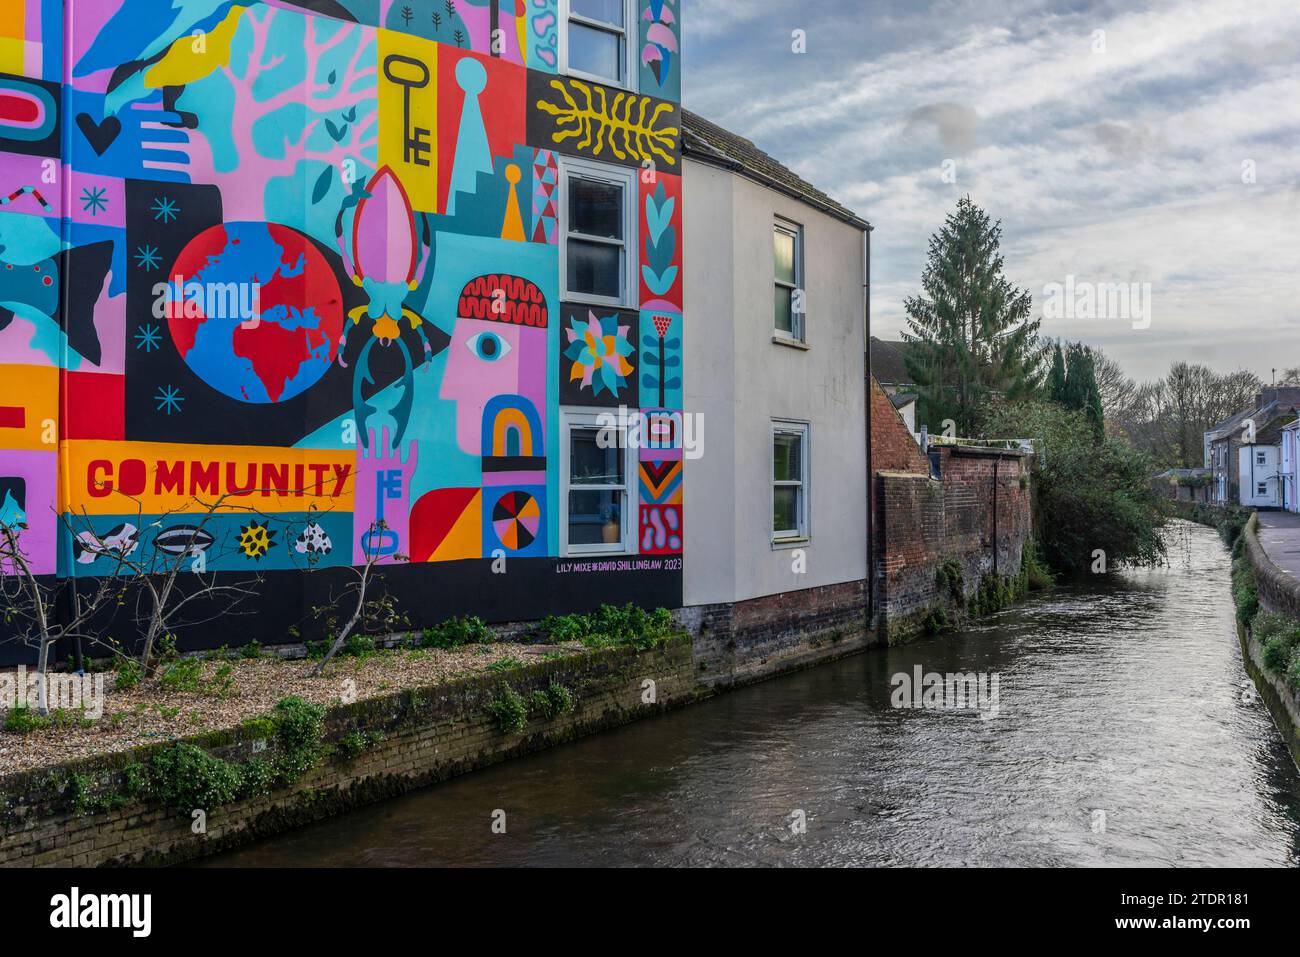 Colourful Global Community street art / wall art mural along Fisherton Road and the Avon River in Salisbury, Wiltshire, England, UK Stock Photo